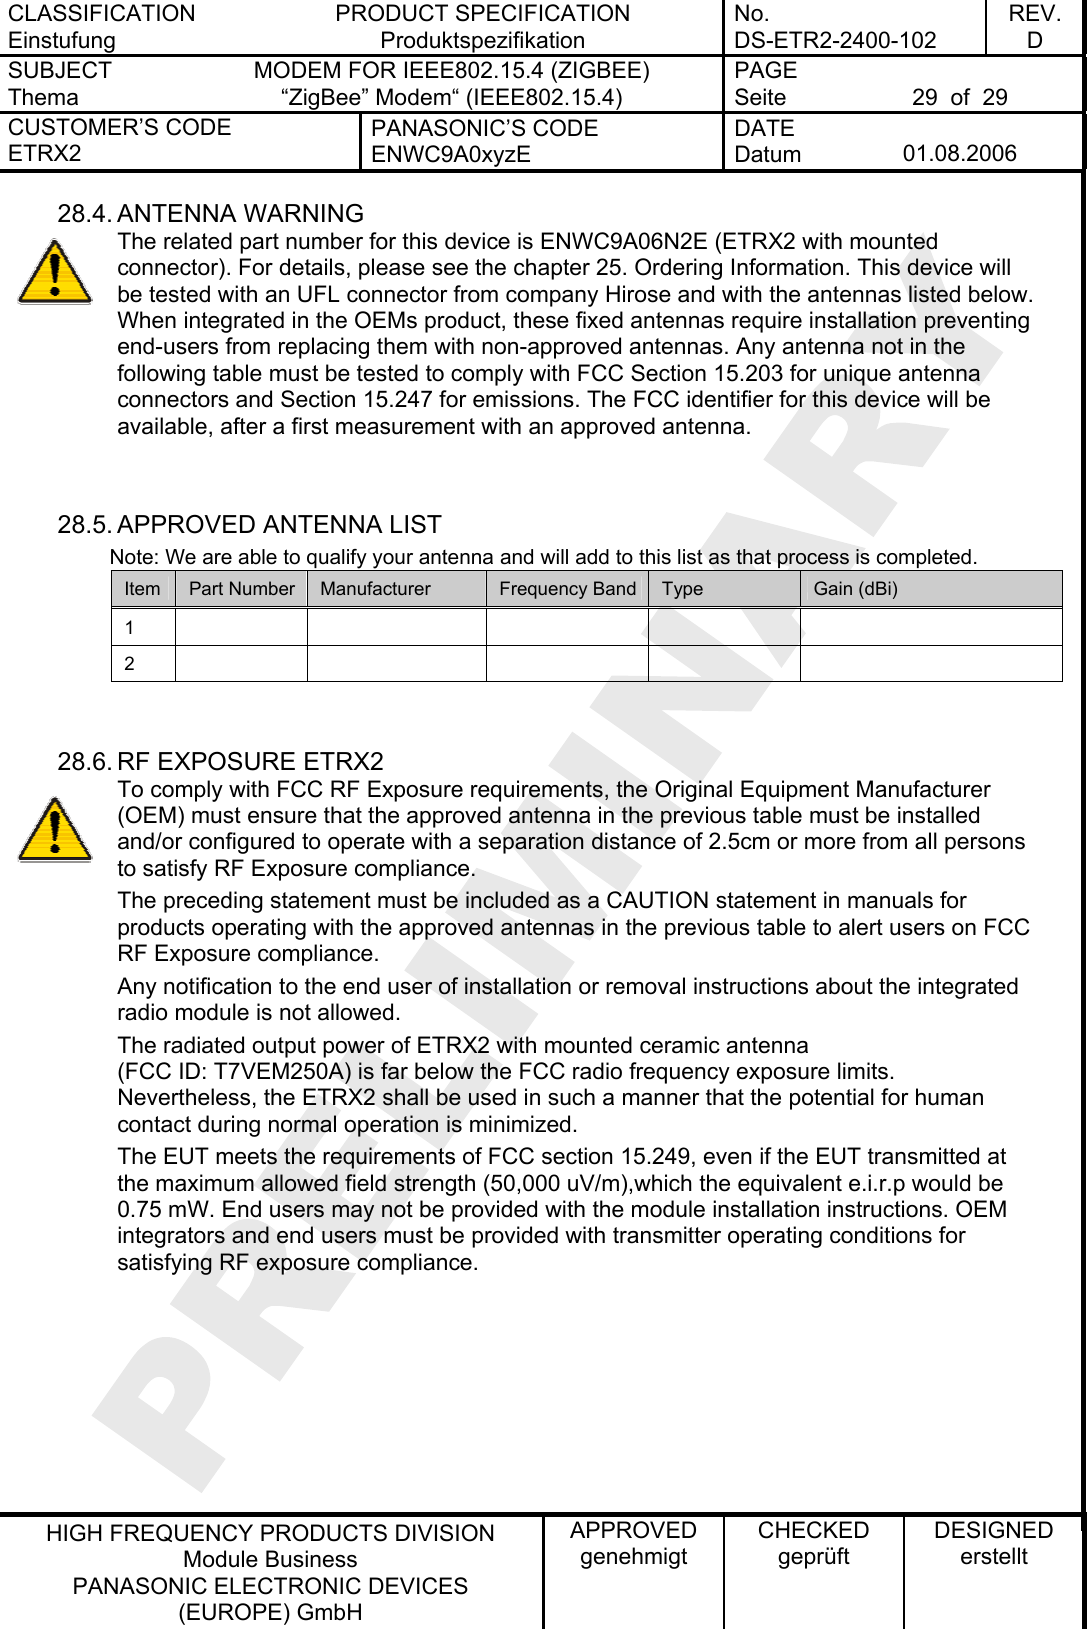 CLASSIFICATION Einstufung PRODUCT SPECIFICATION Produktspezifikation No. DS-ETR2-2400-102 REV. D SUBJECT Thema MODEM FOR IEEE802.15.4 (ZIGBEE) “ZigBee” Modem“ (IEEE802.15.4)   PAGE Seite  29  of  29 CUSTOMER’S CODE ETRX2 PANASONIC’S CODE ENWC9A0xyzE DATE Datum  01.08.2006   HIGH FREQUENCY PRODUCTS DIVISION Module Business PANASONIC ELECTRONIC DEVICES  (EUROPE) GmbH APPROVED genehmigt CHECKED geprüft DESIGNED erstellt 28.4. ANTENNA WARNING The related part number for this device is ENWC9A06N2E (ETRX2 with mounted connector). For details, please see the chapter 25. Ordering Information. This device will be tested with an UFL connector from company Hirose and with the antennas listed below. When integrated in the OEMs product, these fixed antennas require installation preventing end-users from replacing them with non-approved antennas. Any antenna not in the following table must be tested to comply with FCC Section 15.203 for unique antenna connectors and Section 15.247 for emissions. The FCC identifier for this device will be available, after a first measurement with an approved antenna.   28.5. APPROVED ANTENNA LIST          Note: We are able to qualify your antenna and will add to this list as that process is completed. Item  Part Number  Manufacturer  Frequency Band  Type  Gain (dBi) 1          2            28.6. RF EXPOSURE ETRX2 To comply with FCC RF Exposure requirements, the Original Equipment Manufacturer (OEM) must ensure that the approved antenna in the previous table must be installed and/or configured to operate with a separation distance of 2.5cm or more from all persons to satisfy RF Exposure compliance. The preceding statement must be included as a CAUTION statement in manuals for products operating with the approved antennas in the previous table to alert users on FCC RF Exposure compliance. Any notification to the end user of installation or removal instructions about the integrated radio module is not allowed. The radiated output power of ETRX2 with mounted ceramic antenna (FCC ID: T7VEM250A) is far below the FCC radio frequency exposure limits. Nevertheless, the ETRX2 shall be used in such a manner that the potential for human contact during normal operation is minimized. The EUT meets the requirements of FCC section 15.249, even if the EUT transmitted at the maximum allowed field strength (50,000 uV/m),which the equivalent e.i.r.p would be 0.75 mW. End users may not be provided with the module installation instructions. OEM integrators and end users must be provided with transmitter operating conditions for satisfying RF exposure compliance.   